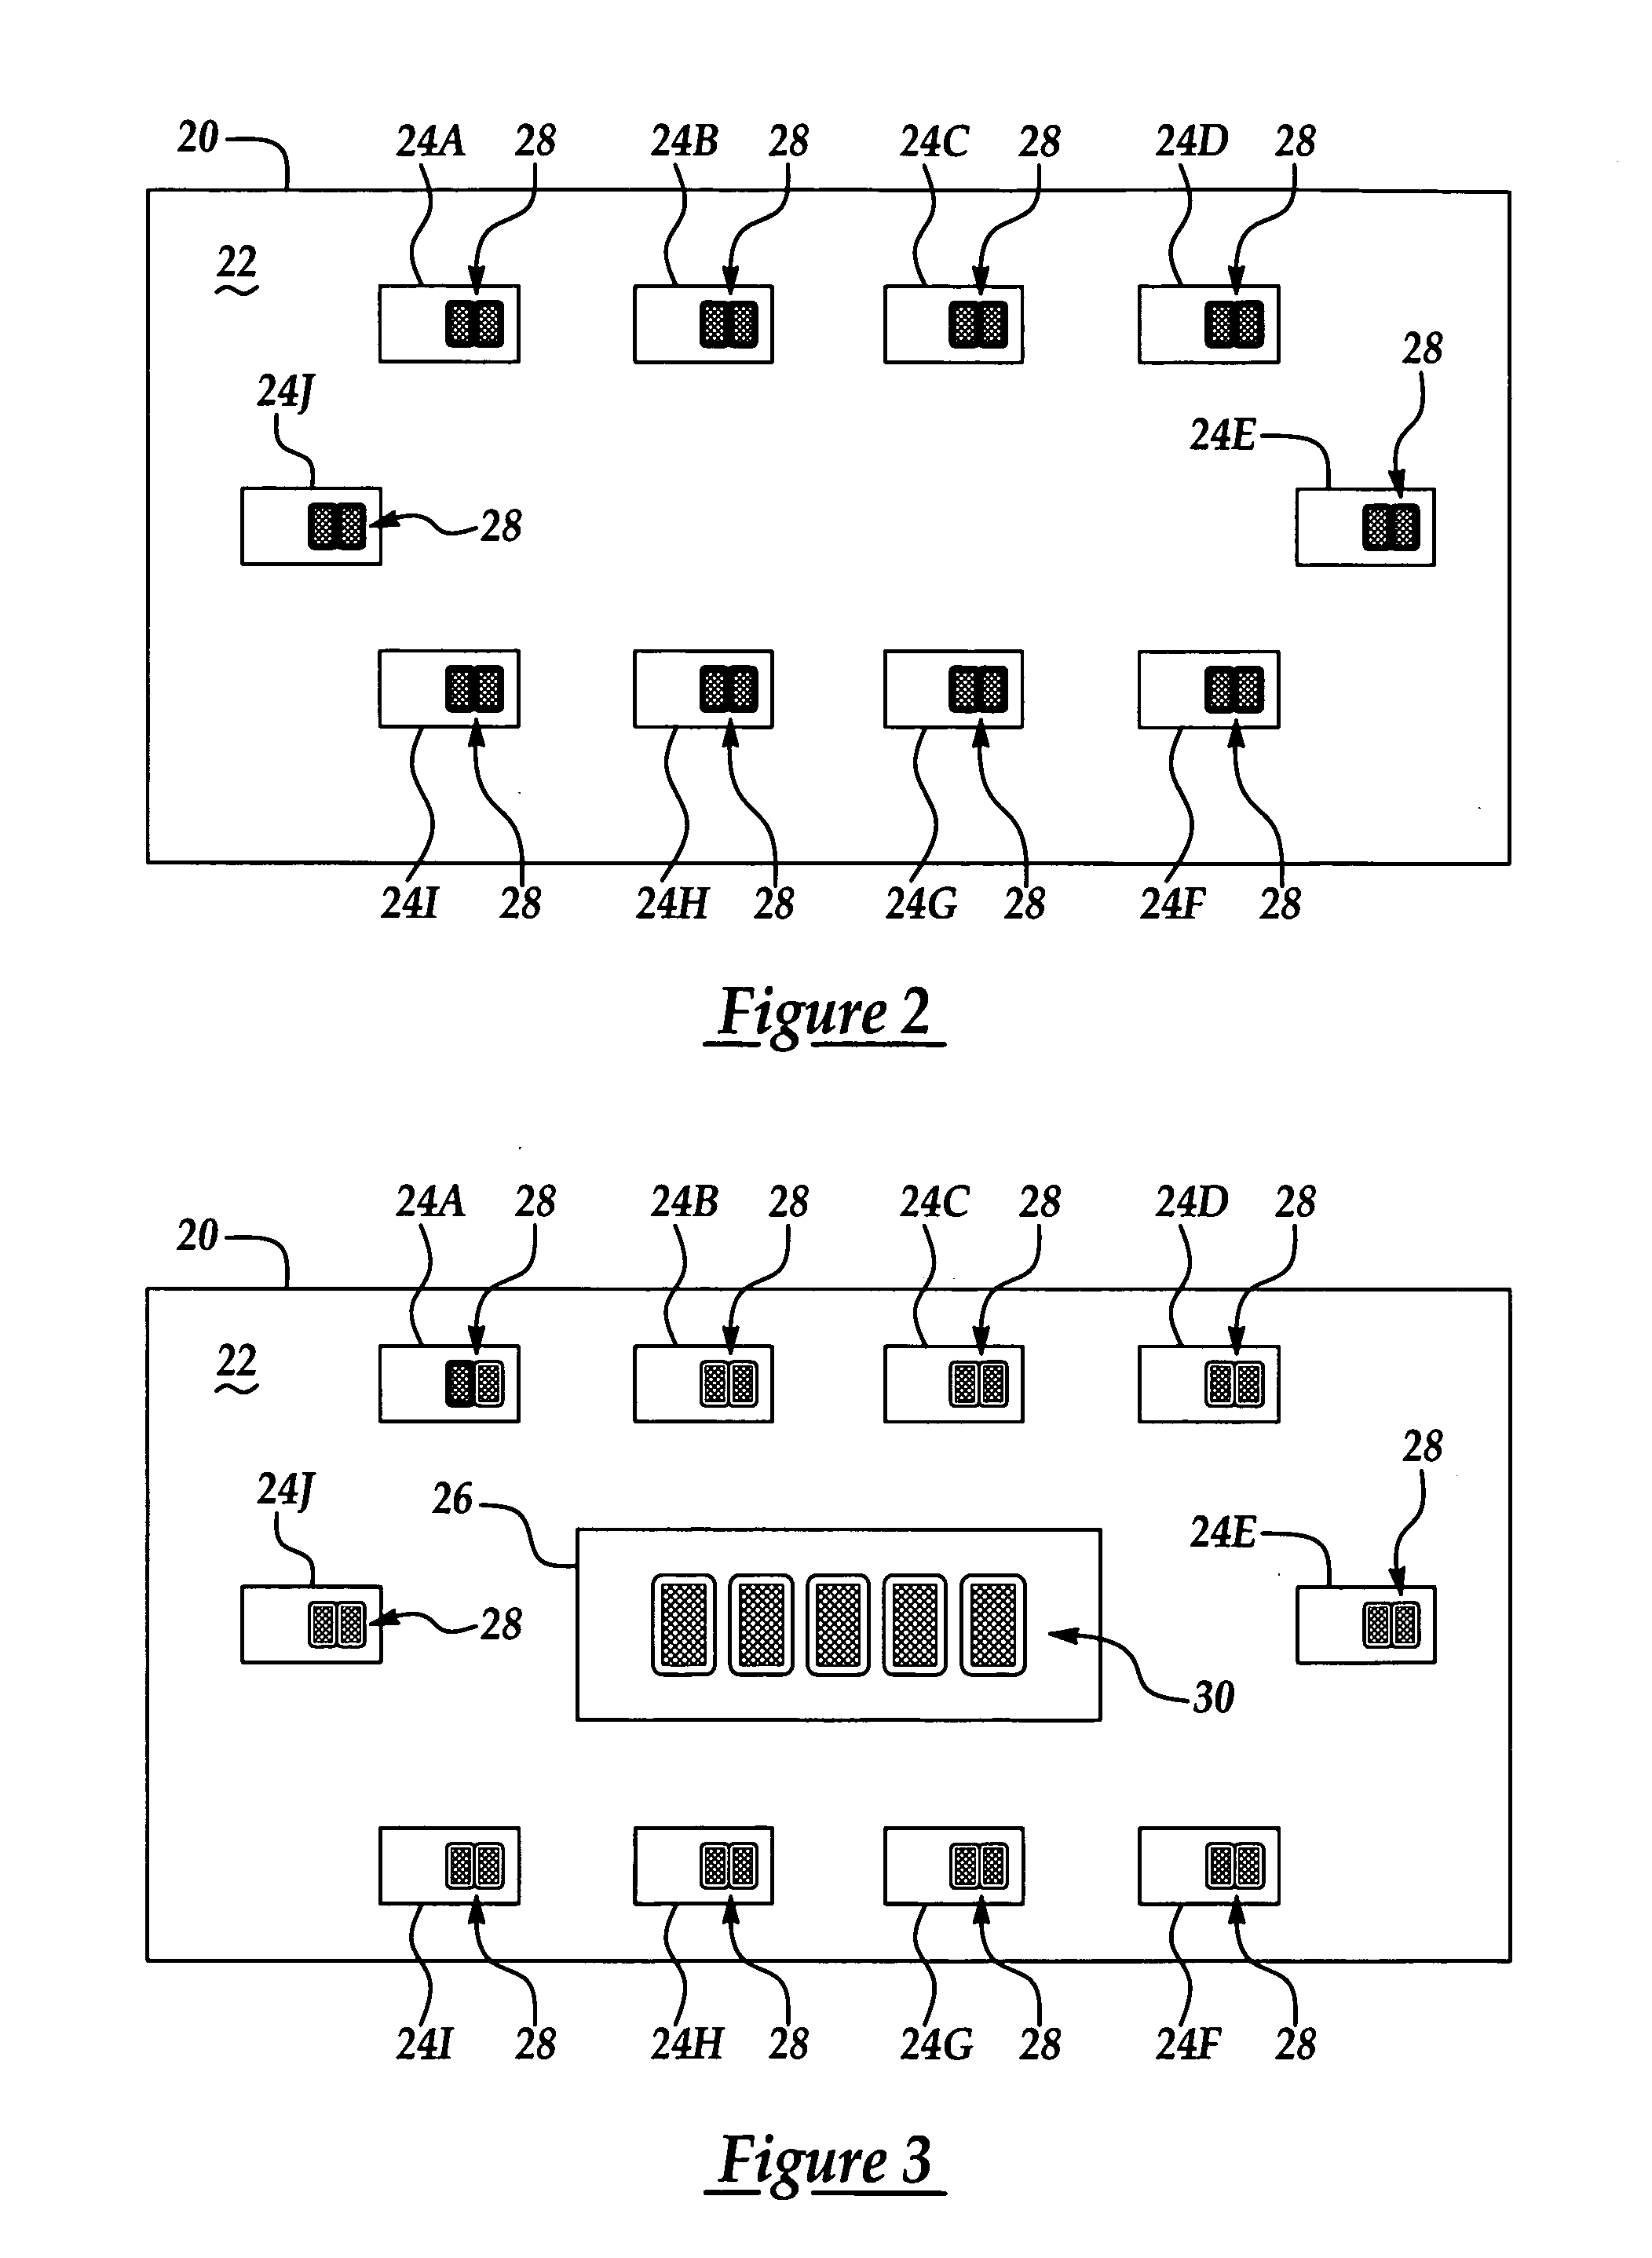 System and method for providing a card tournament using one or more electronic card table